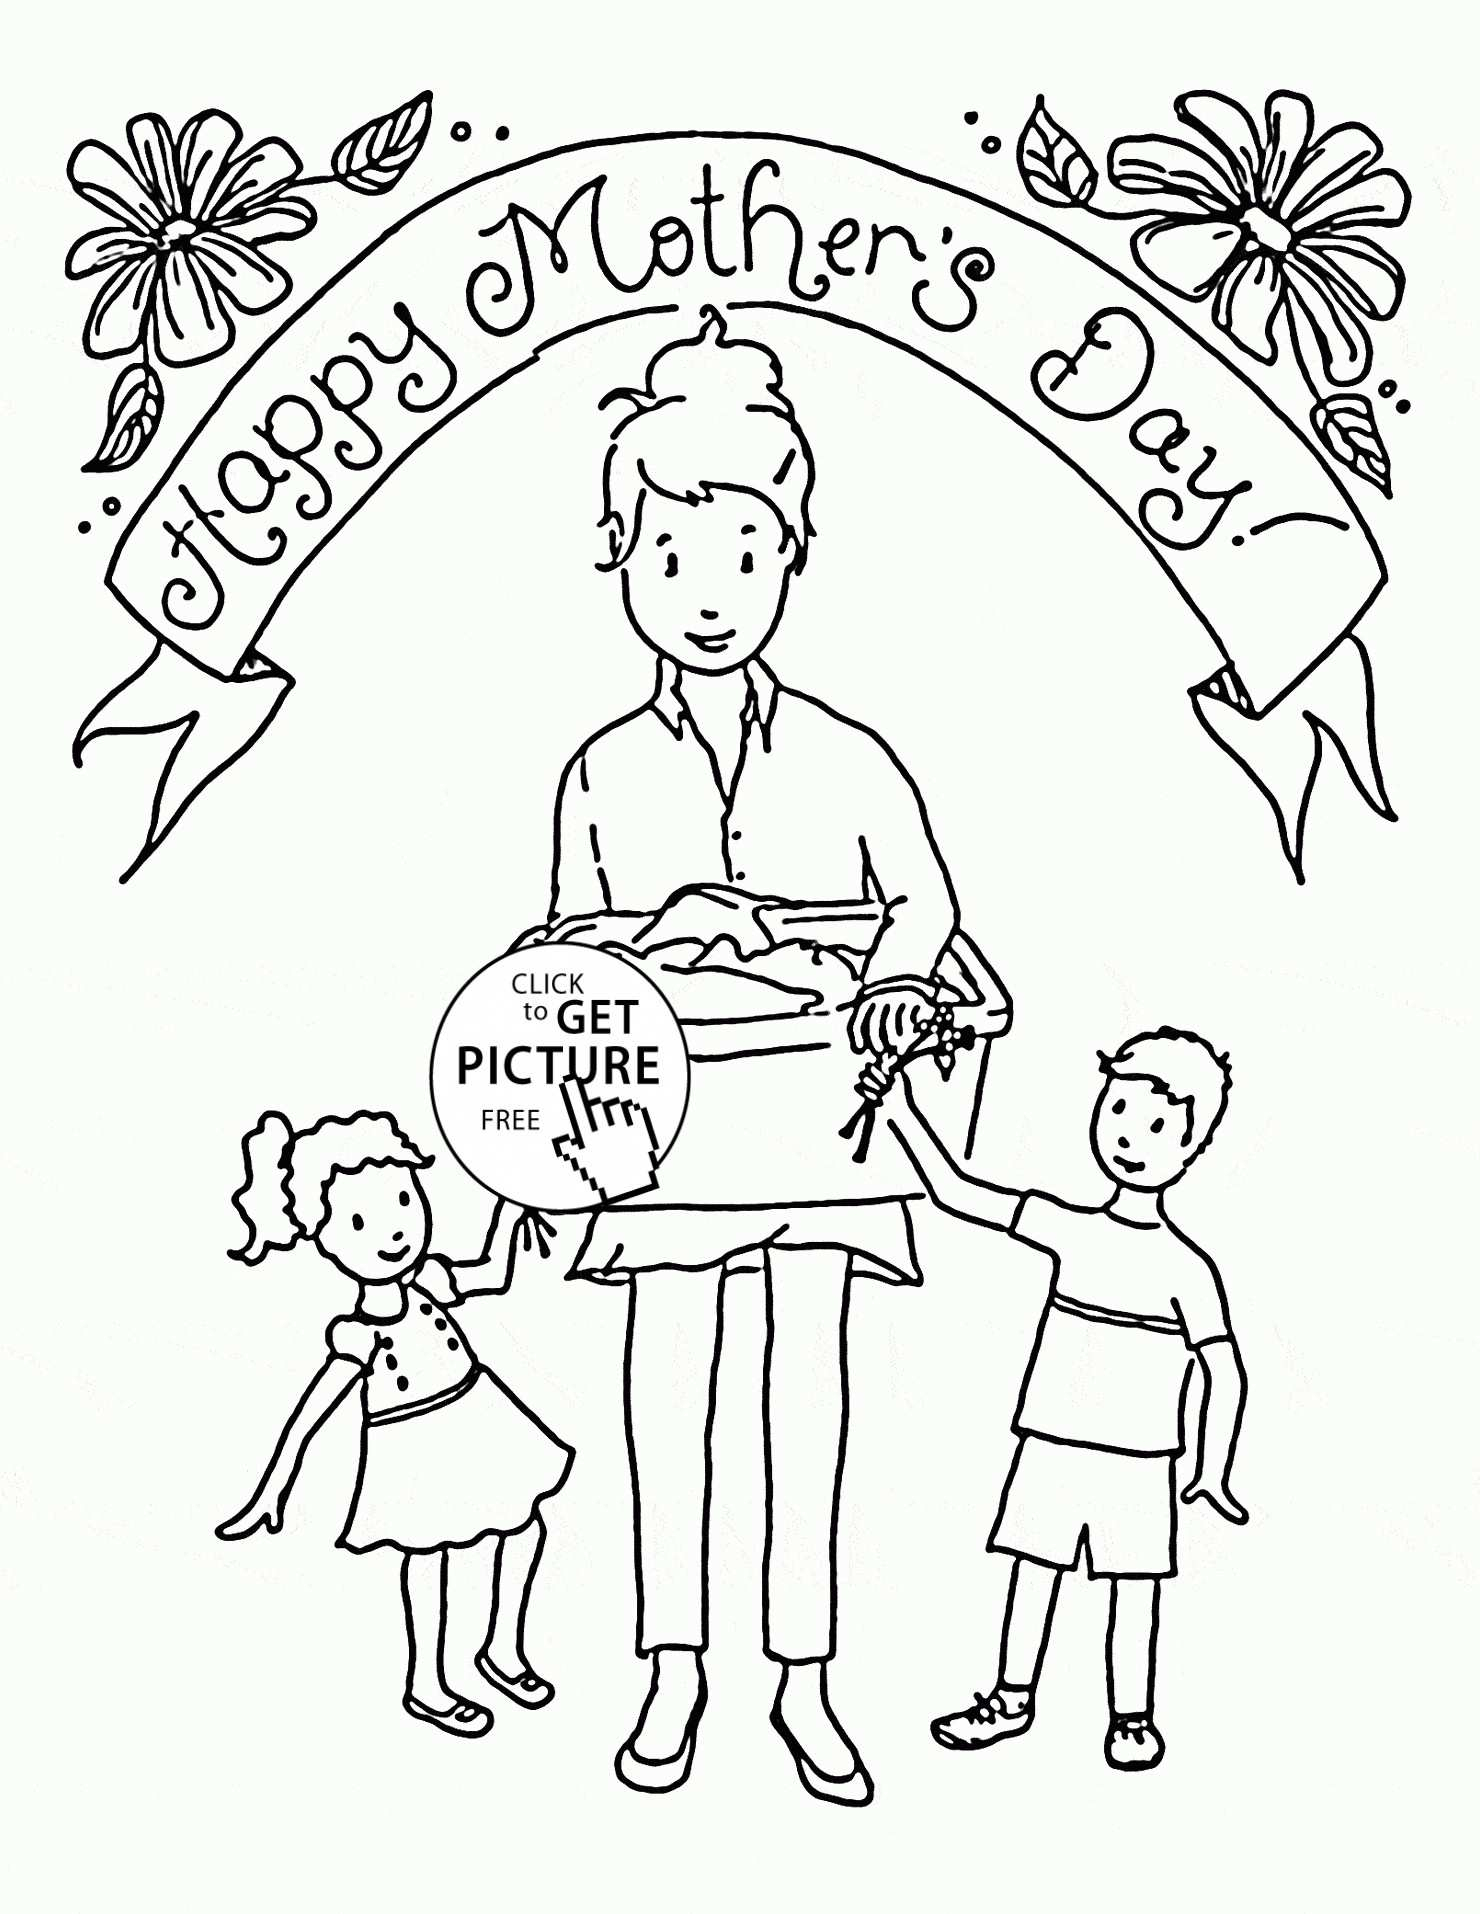 Spanish Valentine&amp;#039;s Day Cards Mothers Day Coloring Page Awesome - Free Spanish Mothers Day Cards Printable